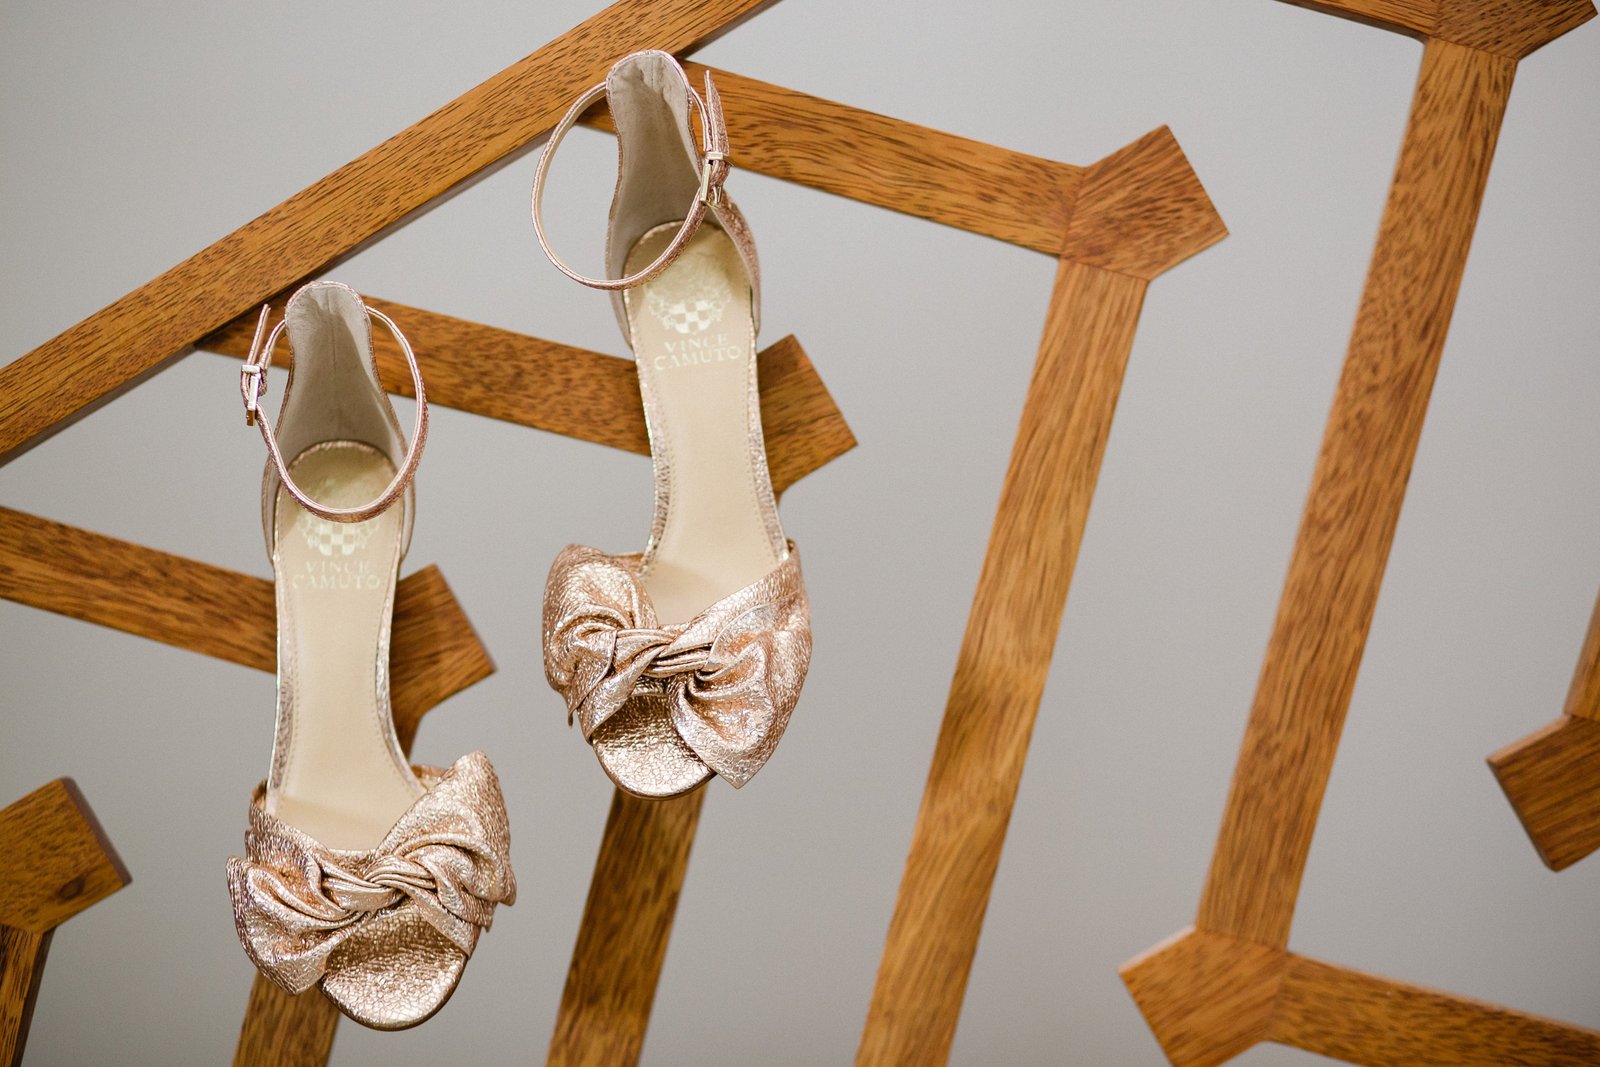 Beautiful Vince Camuto heels for Ashley's wedding day. This went perfectly with her Vera Wang dress at The Cape, in Los Cabos Mexico.